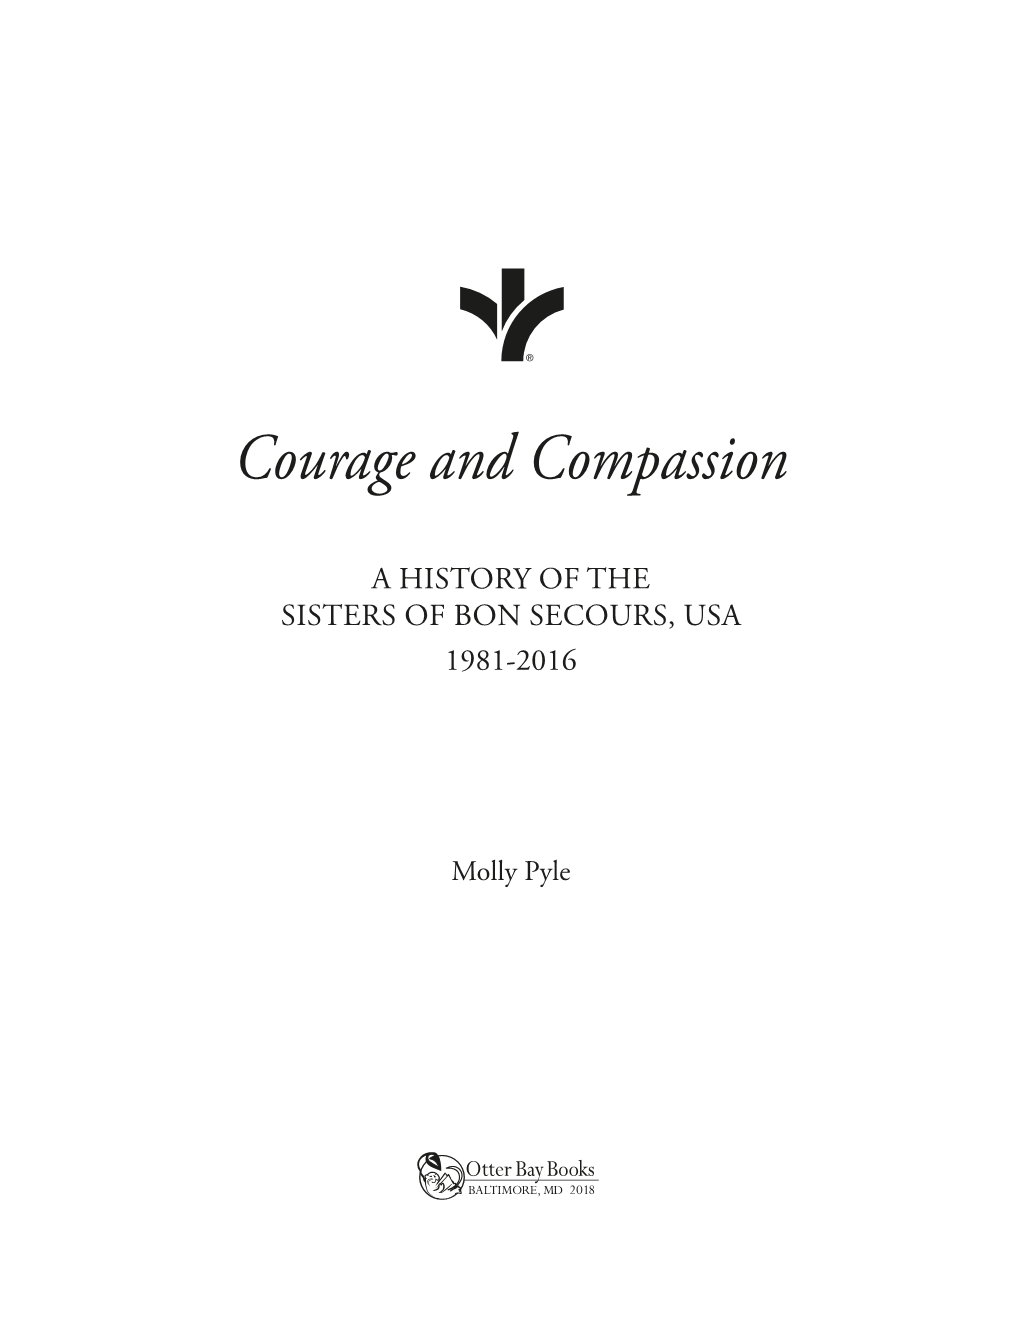 Courage and Compassion